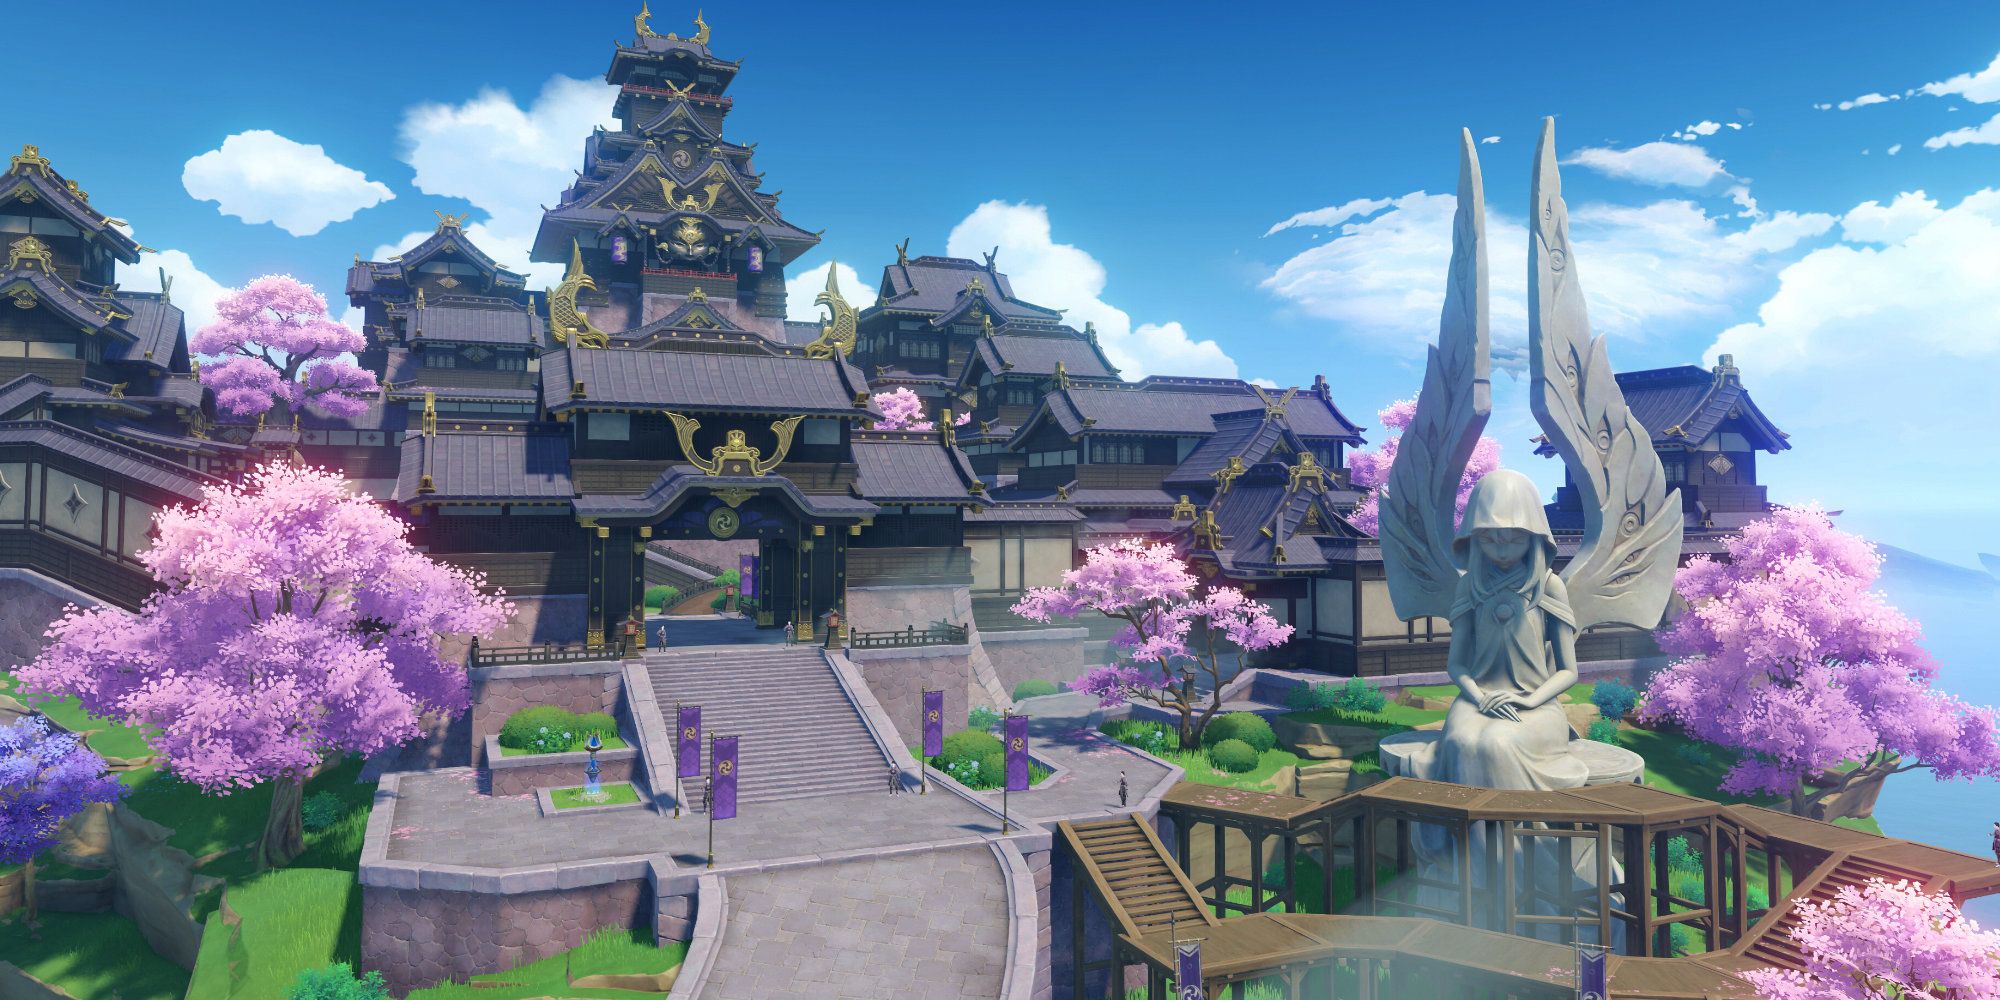 The Shogun's Palace during the daytime in Inazuma from Genshin Impact.